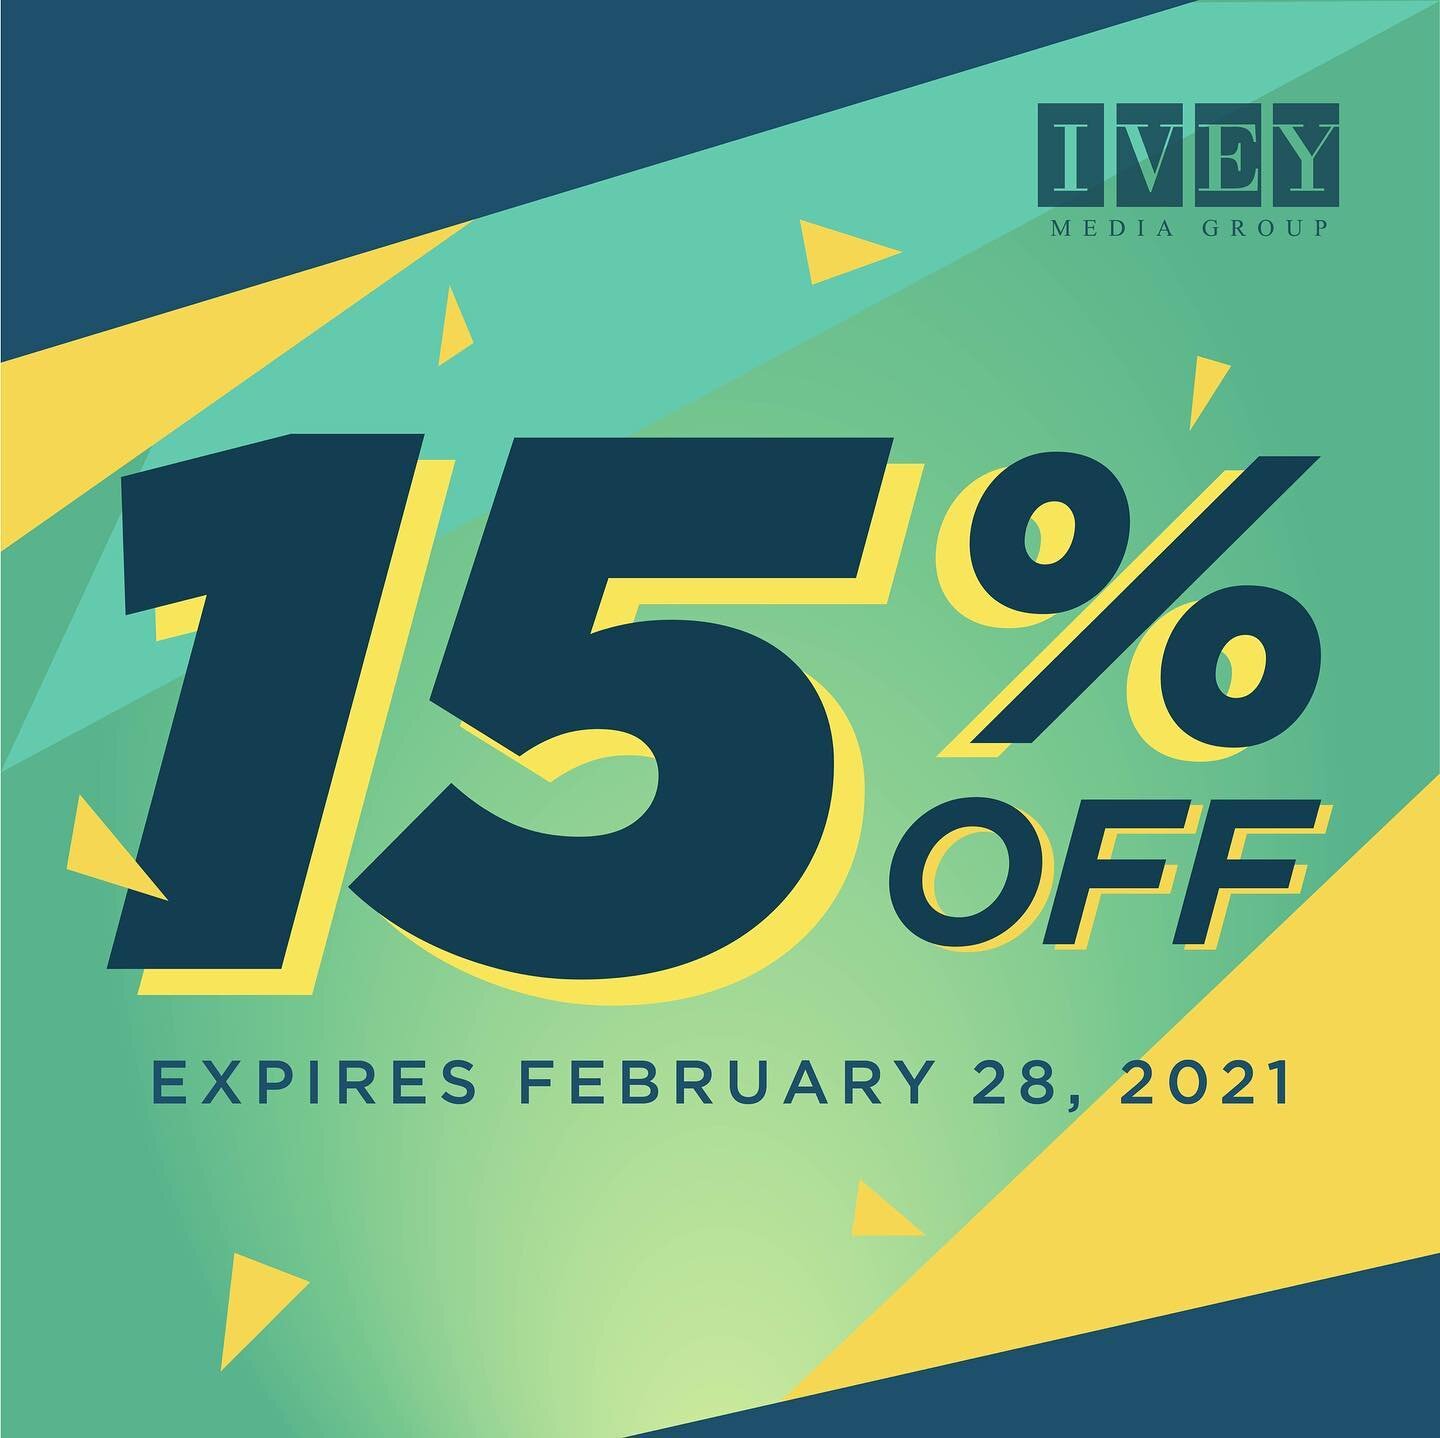 We know you have NEW IDEAS for the NEW YEAR and we want to help you bring that Vision to life THIS YEAR! As a gift, we would like to offer you 15% off your next project with IMG. 
&bull;
Sometimes, all you need is a partner to help walk you through t